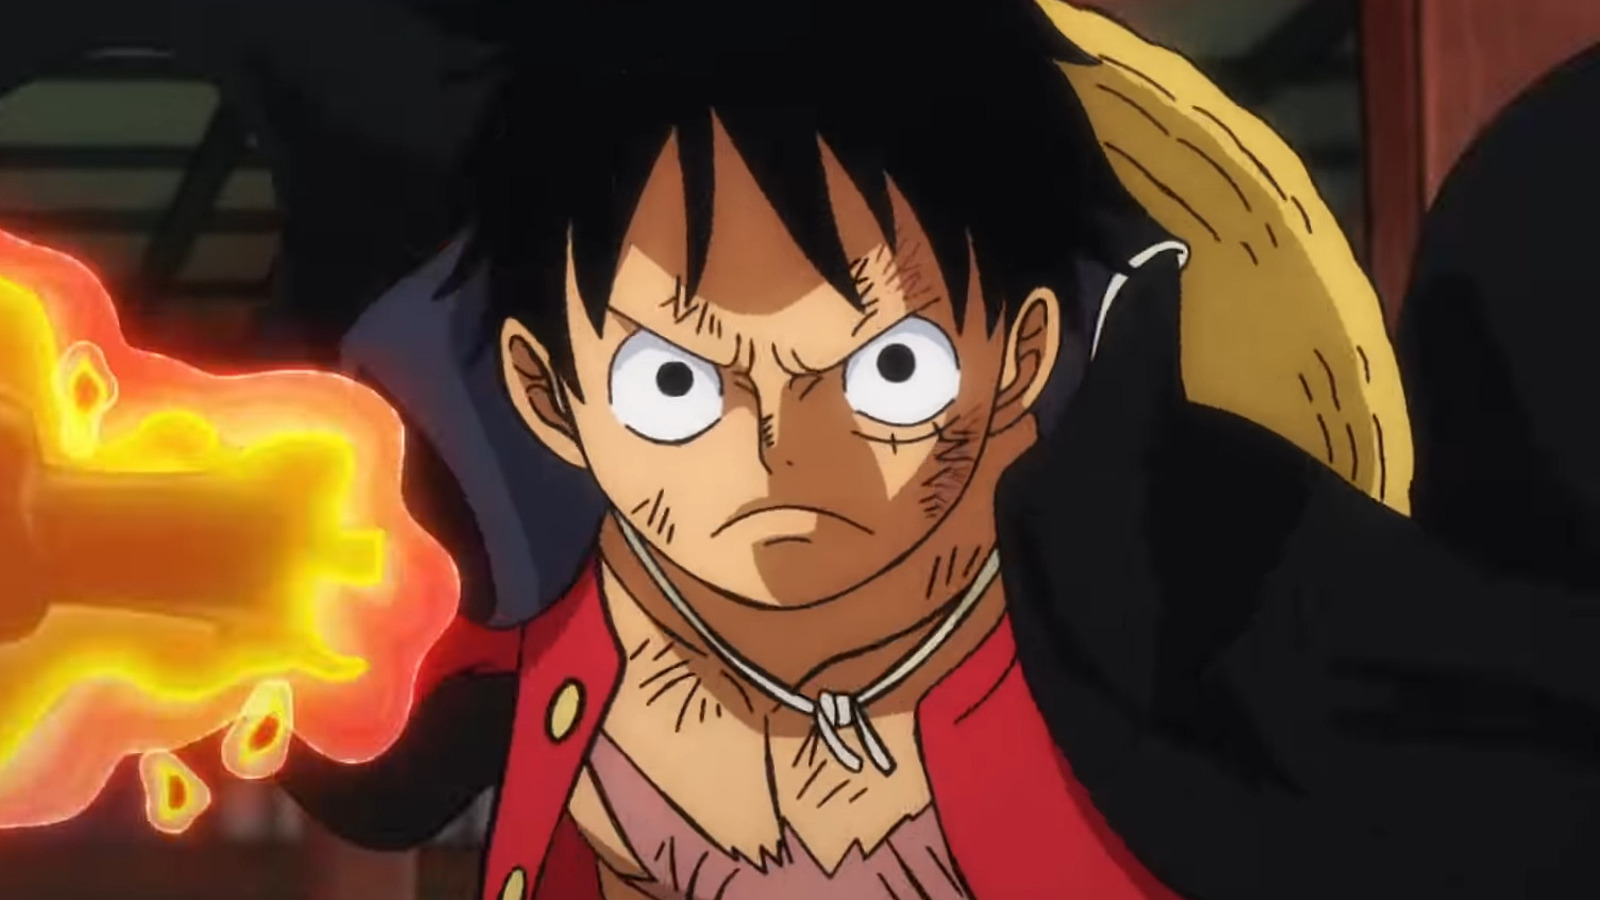 The English dub of One Piece Episode 1000 will premiere at Anime